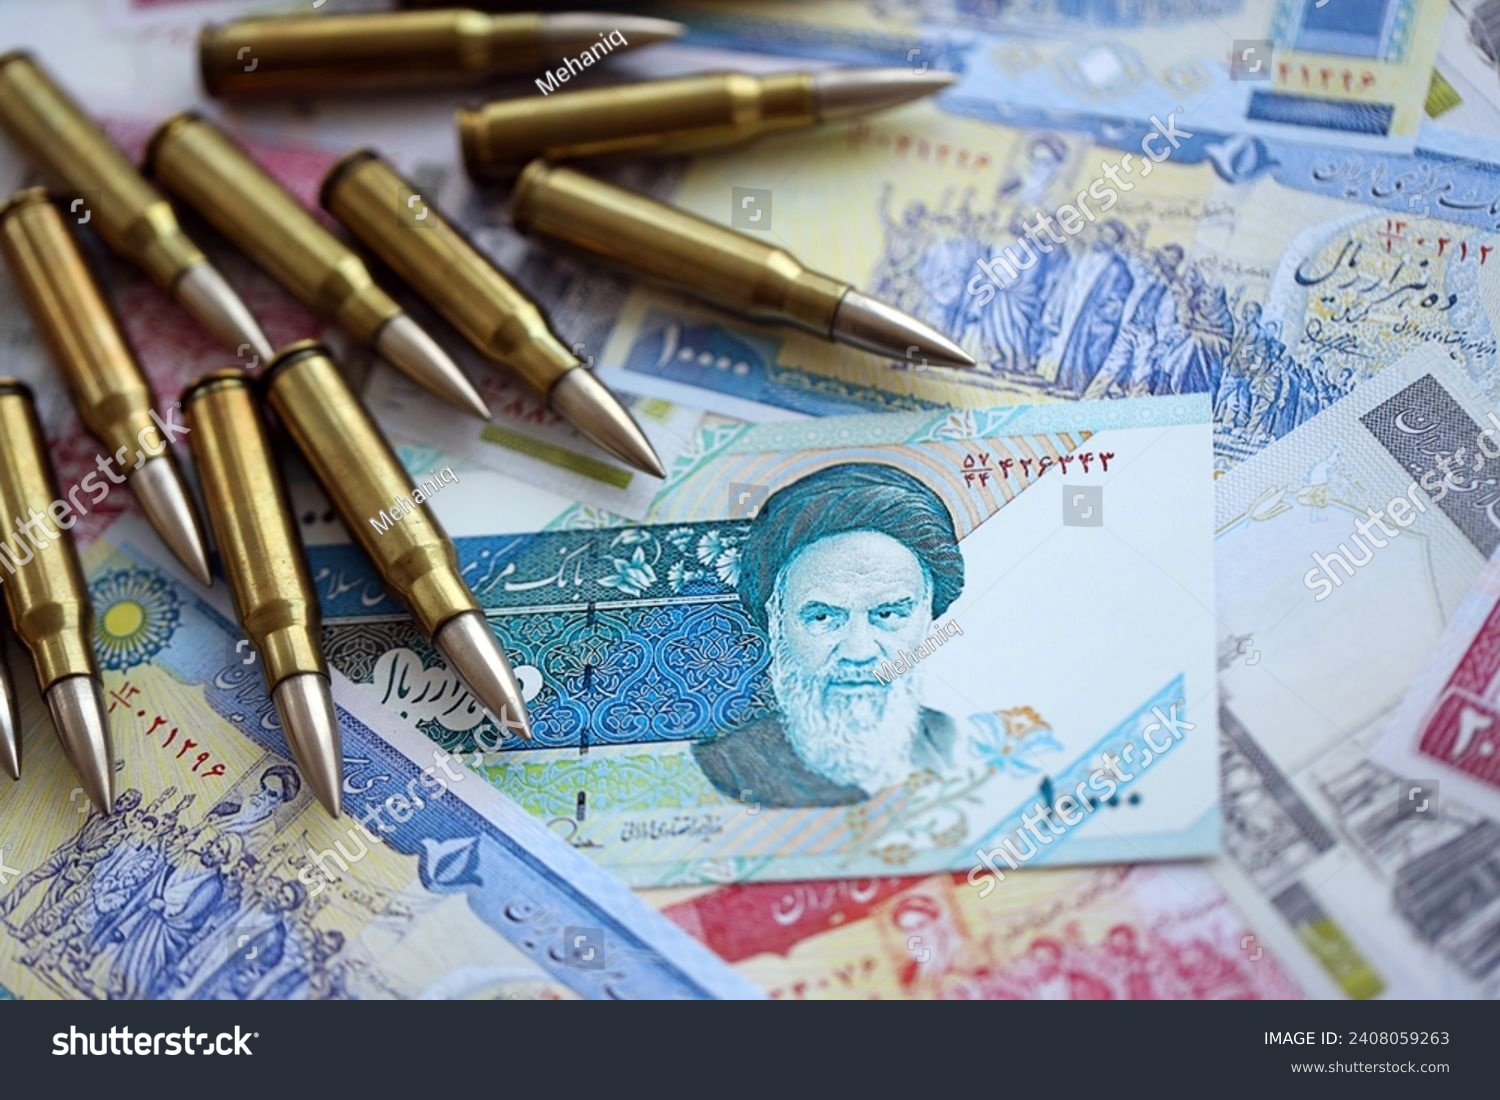 Many bullets and iranian rials money bills close up. Concept of terrorism funding or financial operations to support war in Iran #2408059263